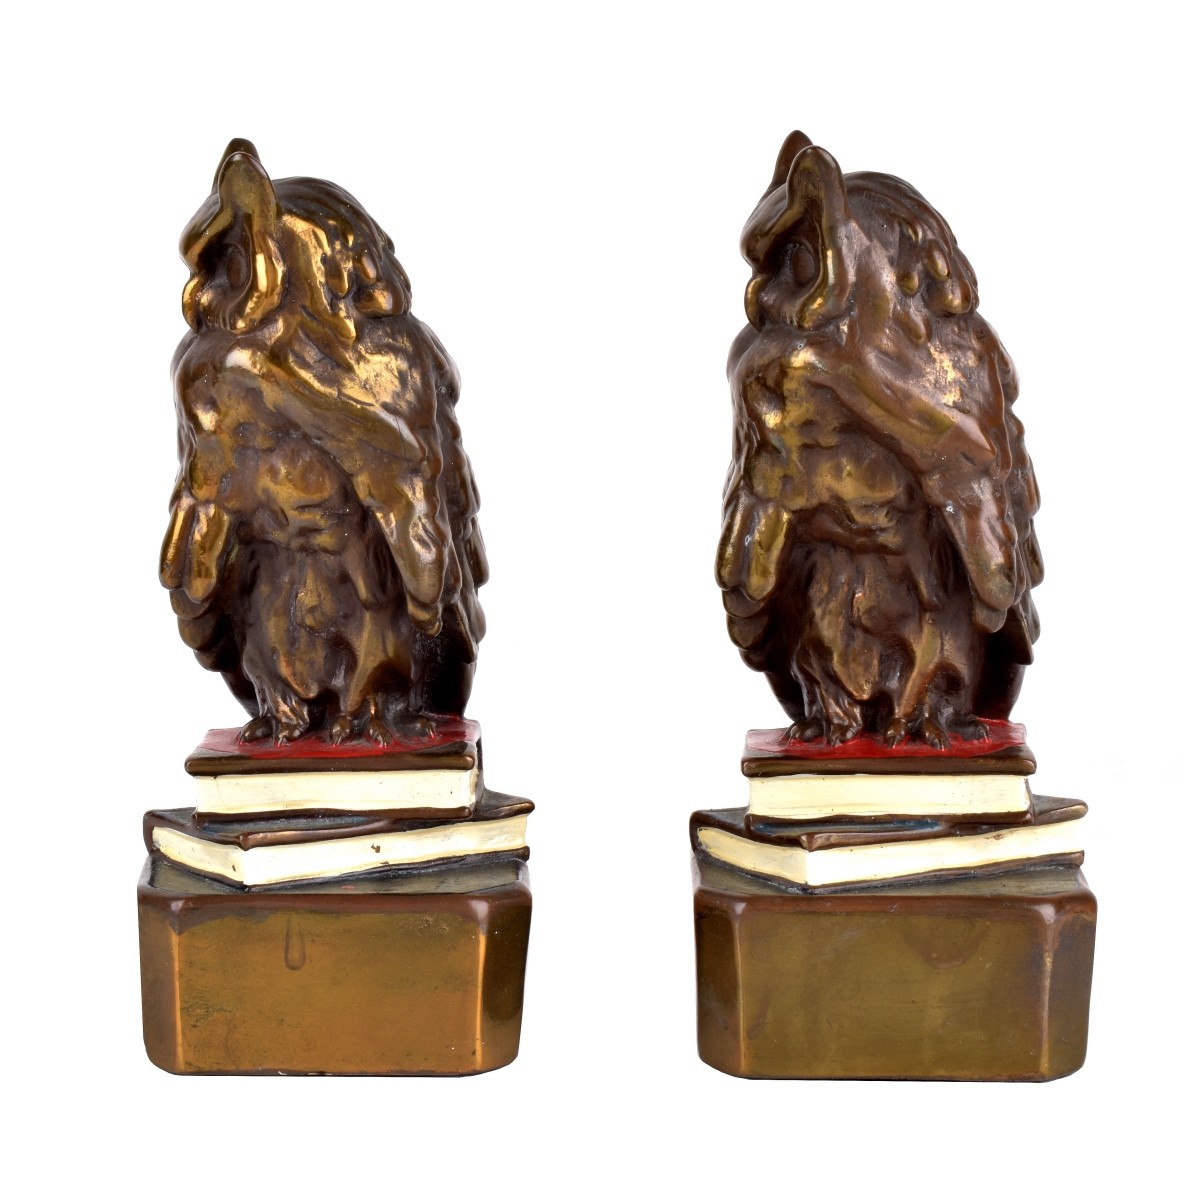 owl bookends for sale